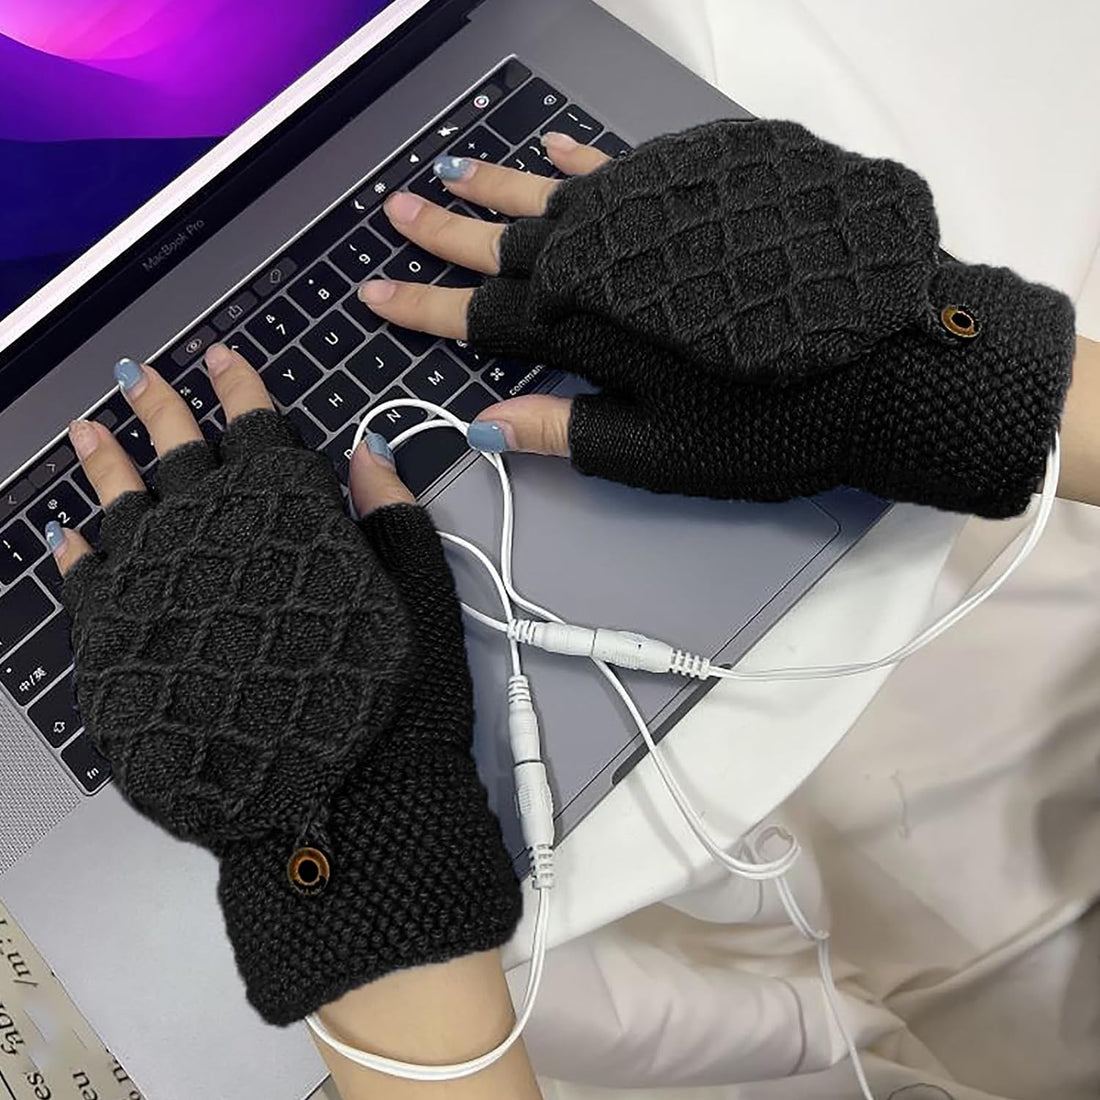 Womens USB Heated Winter Gloves Men Knitted Convertible Fingerless Gloves Electric Hand Warmer Fur Wool Thermal Cycling Mittens Half Finger Heating Work Texting Gloves Christmas Winter Gift